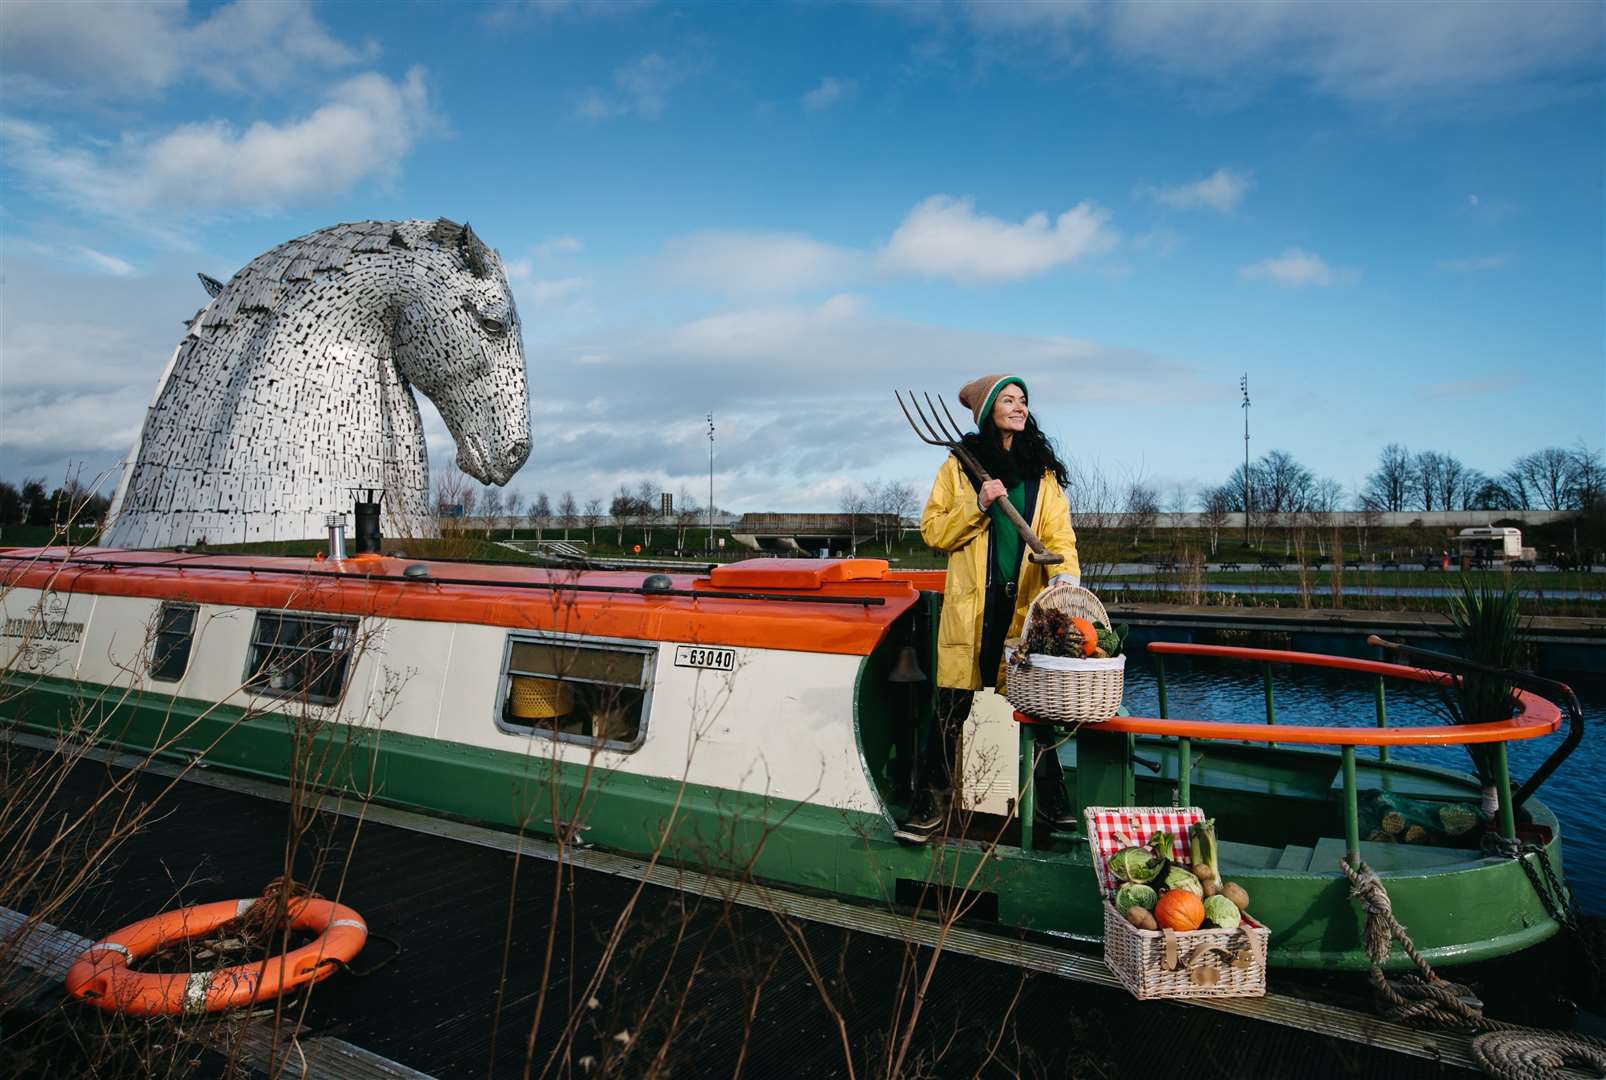 Events manager Yvonne Kincaid at the Kelpies, Falkirk. A Dandelion floating garden will tour the Forth and Clyde and Union canal network.